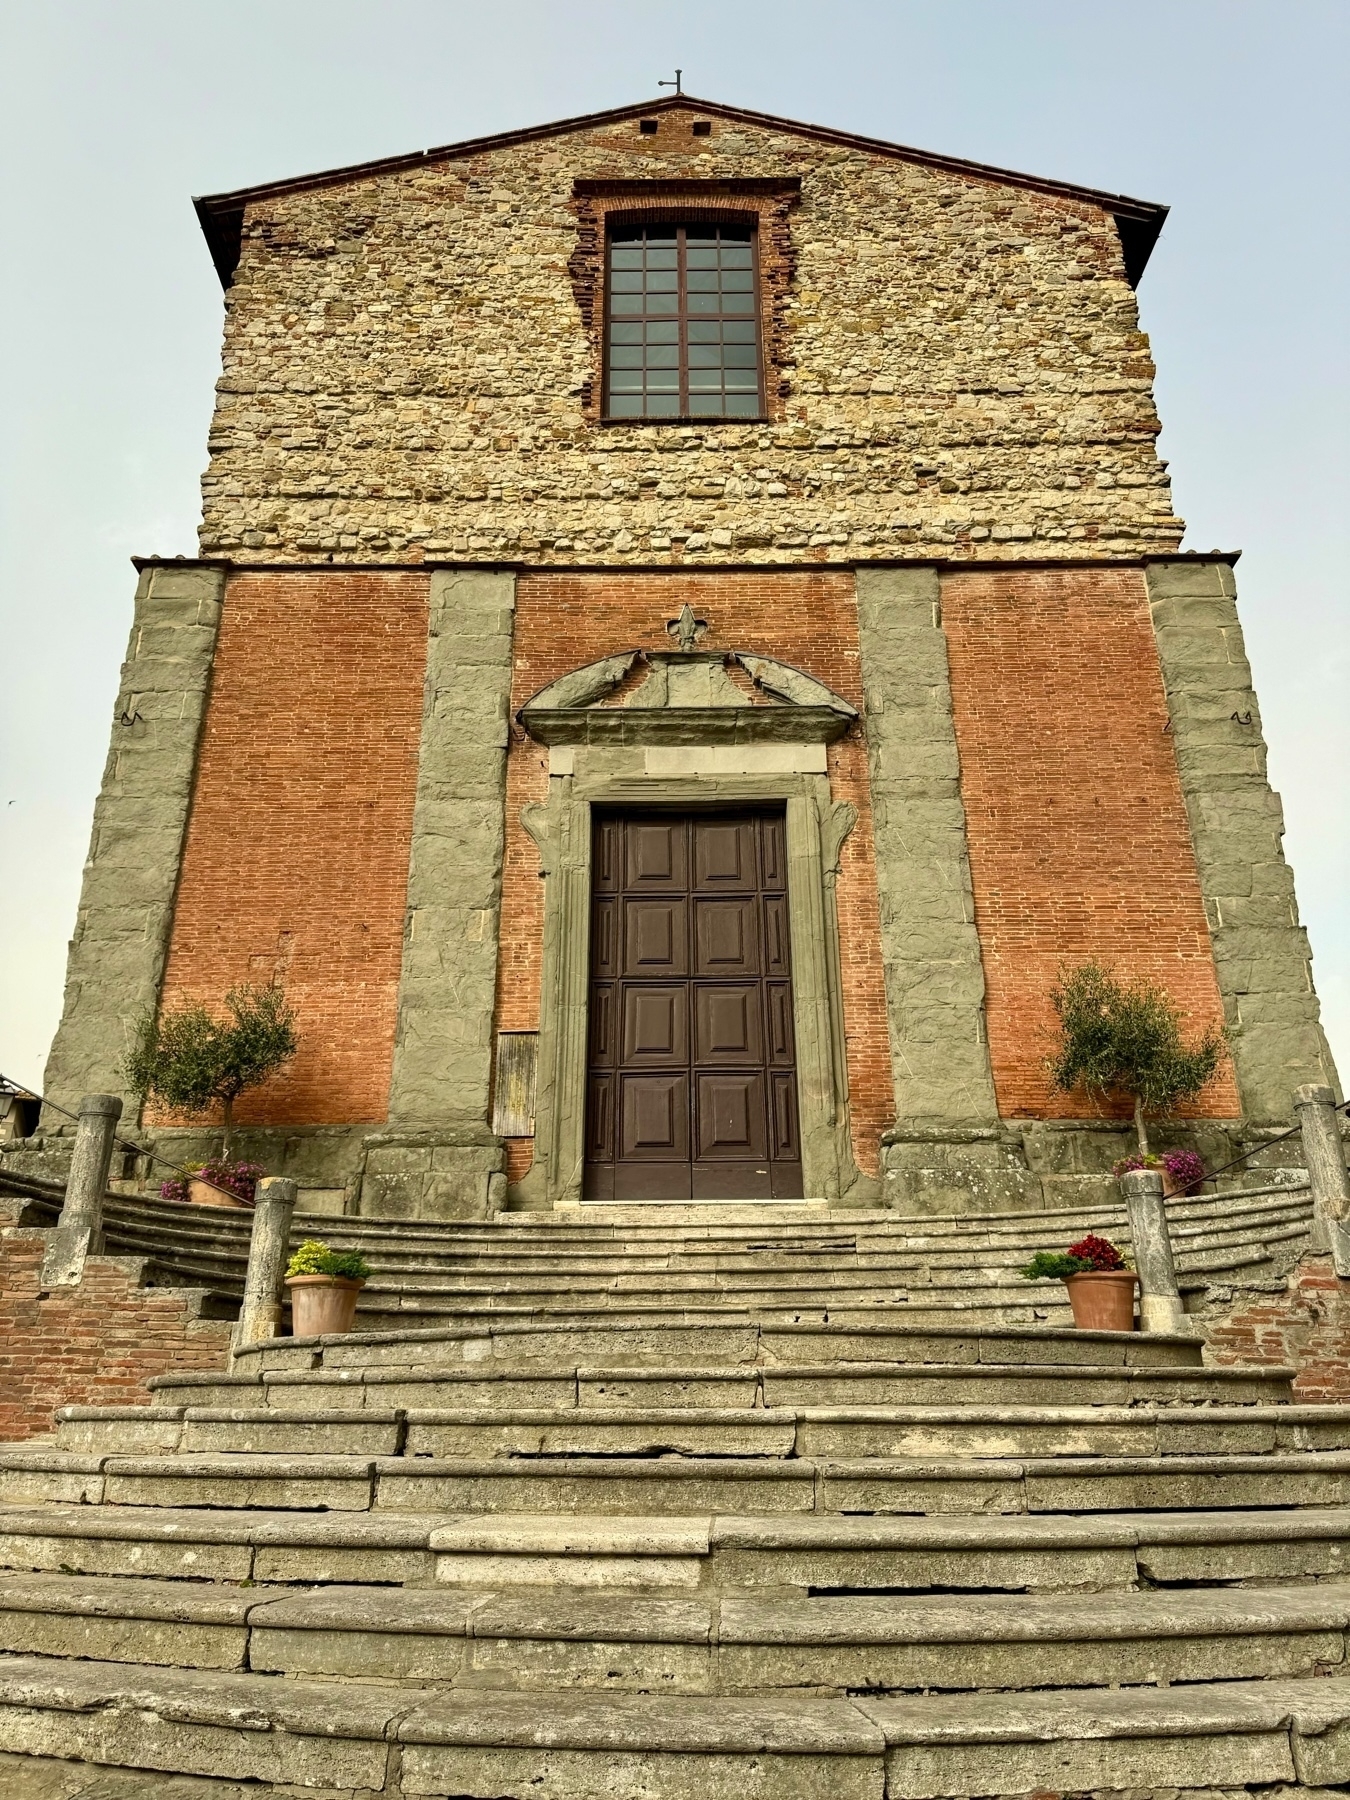 A stone and brick church facade with a large wooden door and a tall window above it. The church is accessed via a set of wide, stone stairs. Two potted plants flank the steps, and two additional potted plants are placed higher up. 